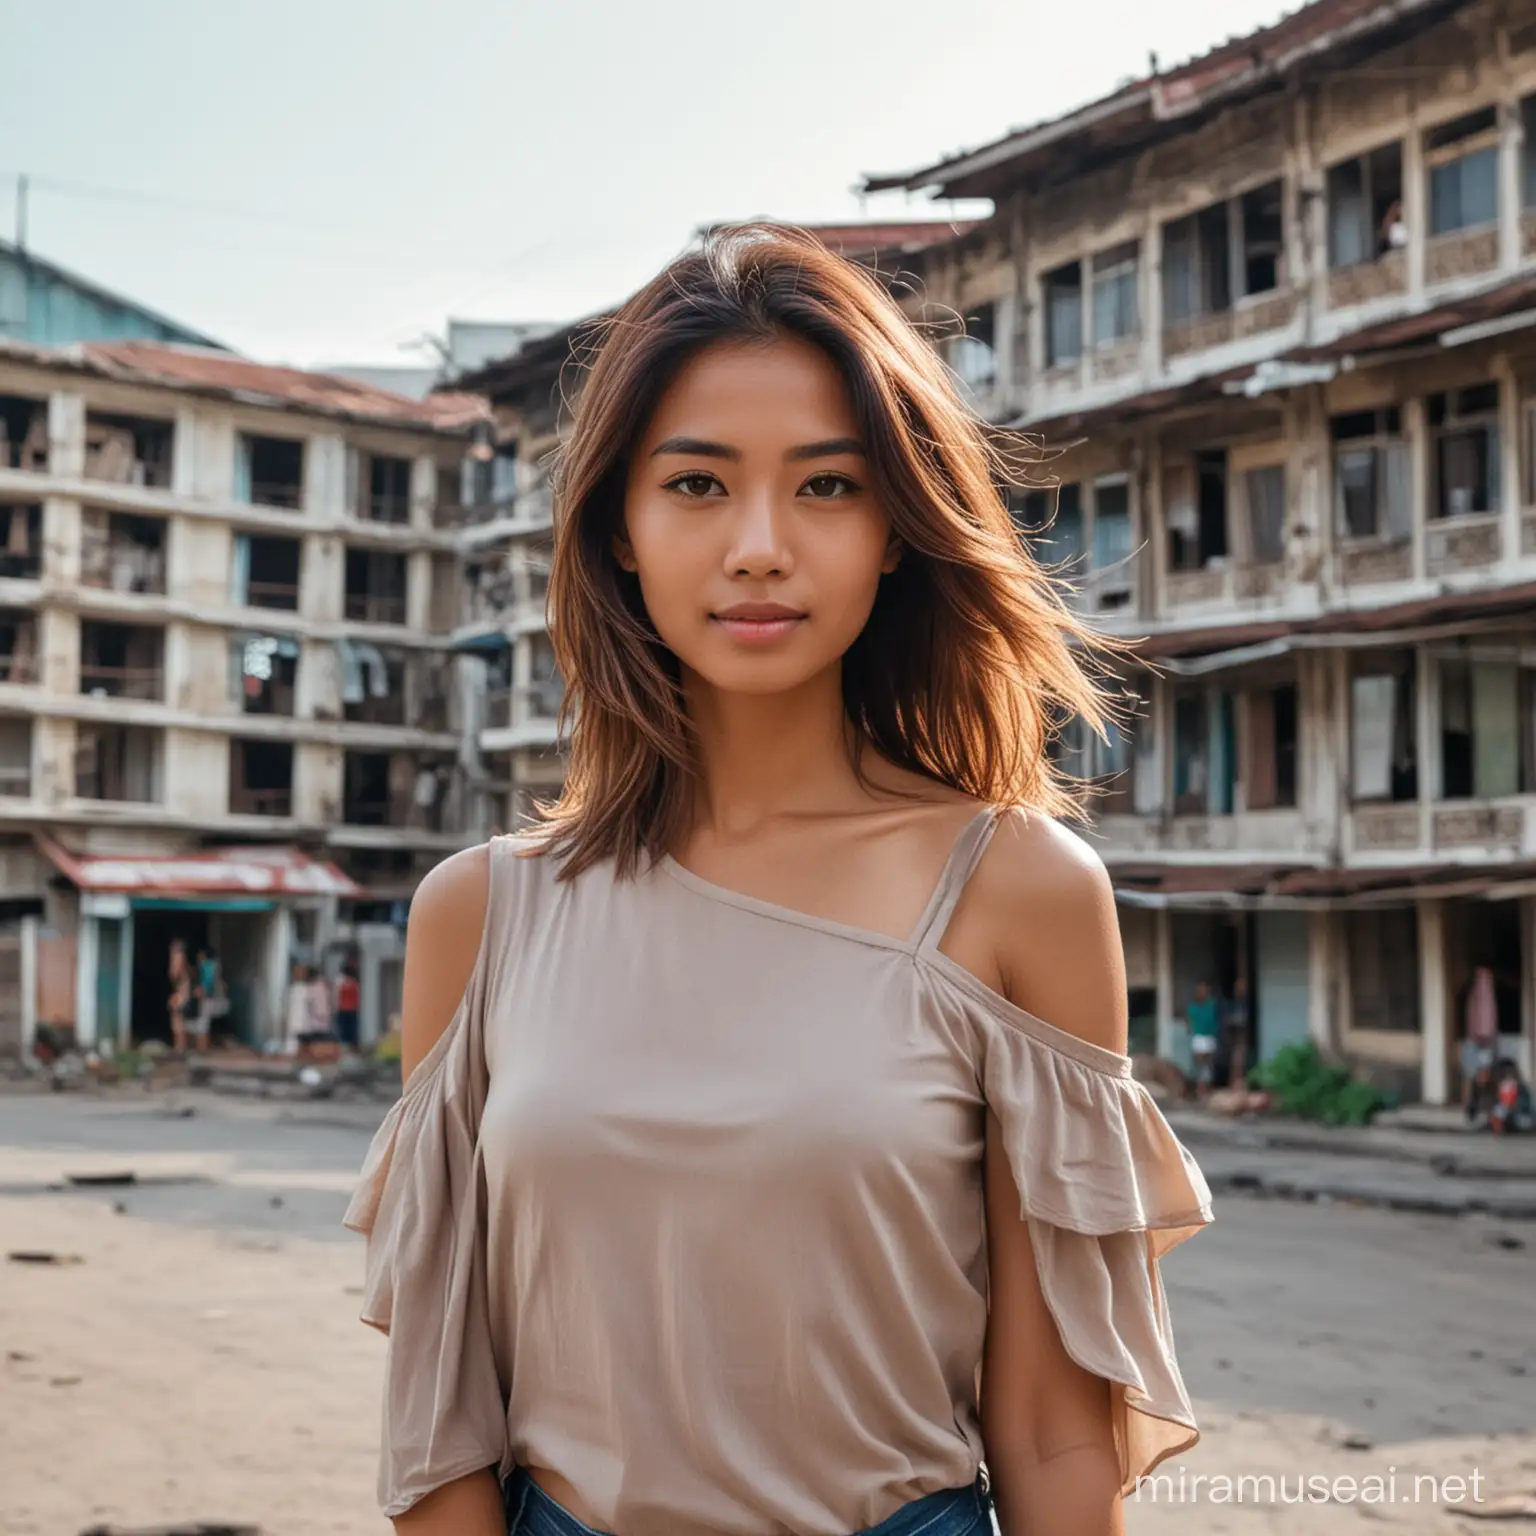 A beautiful woman with shoulder-length layered hair stands, with a building in the background Indonesia